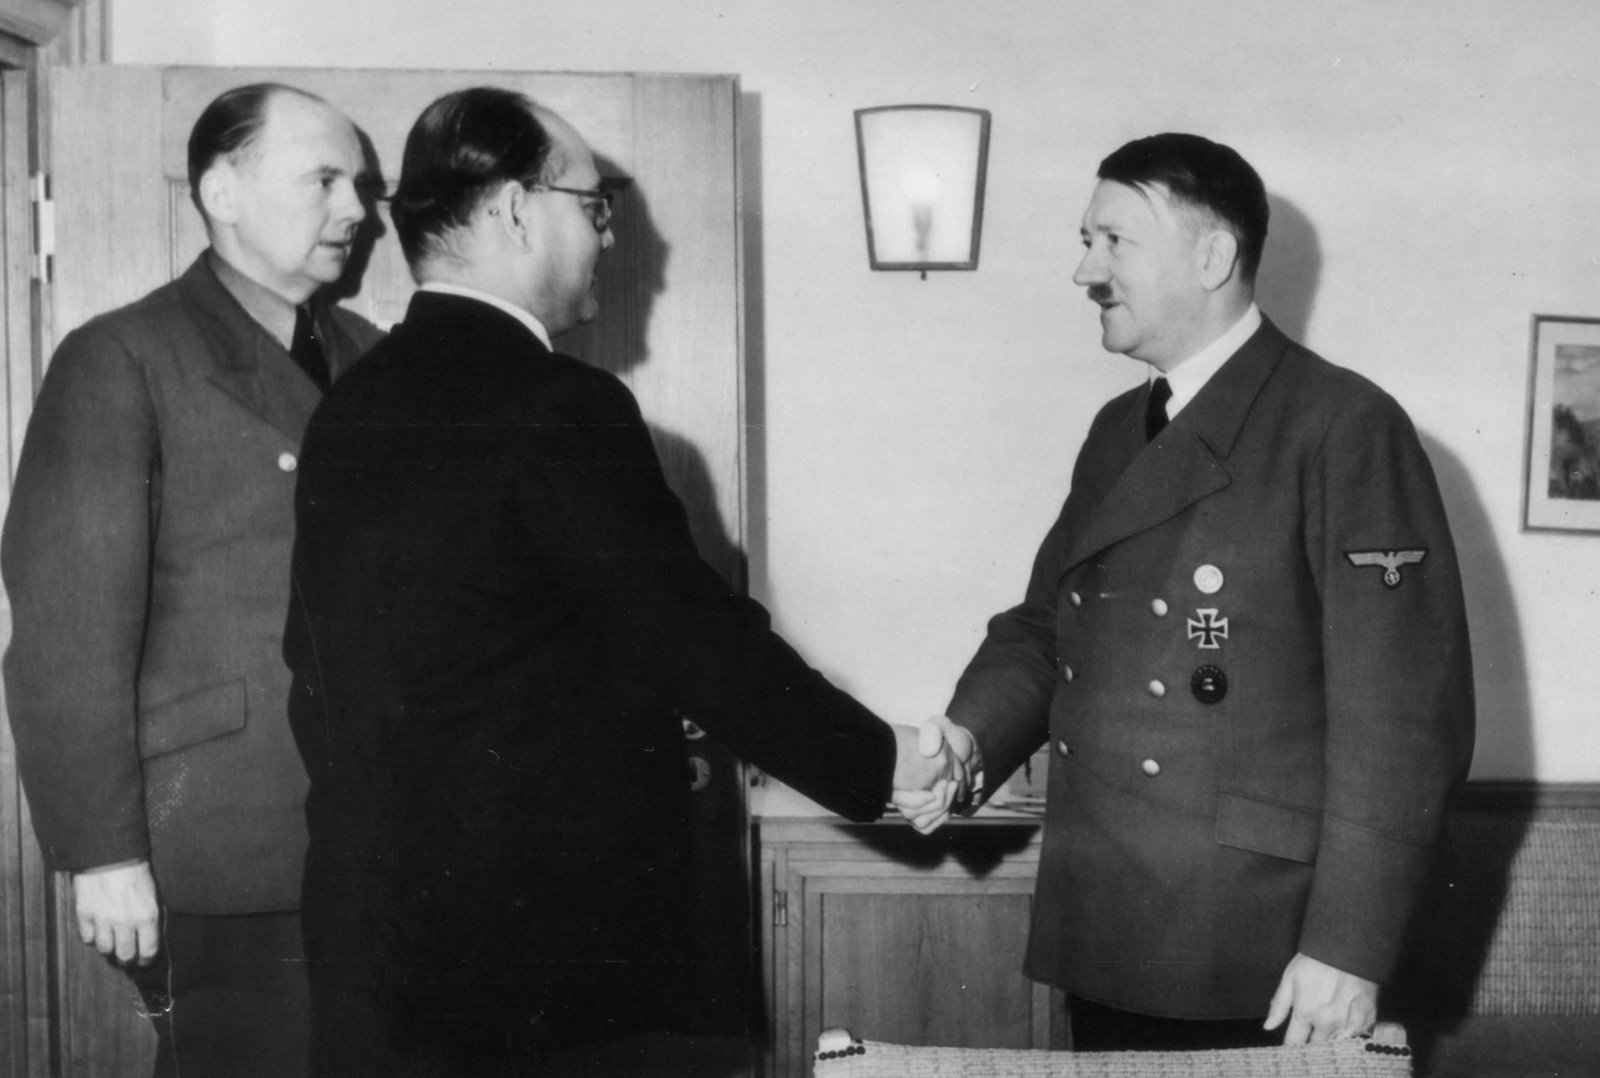 Subhash Chandra Bose and Adolf Hitler, Reich Chancellery, Berlin, Germany, 29 May 1942